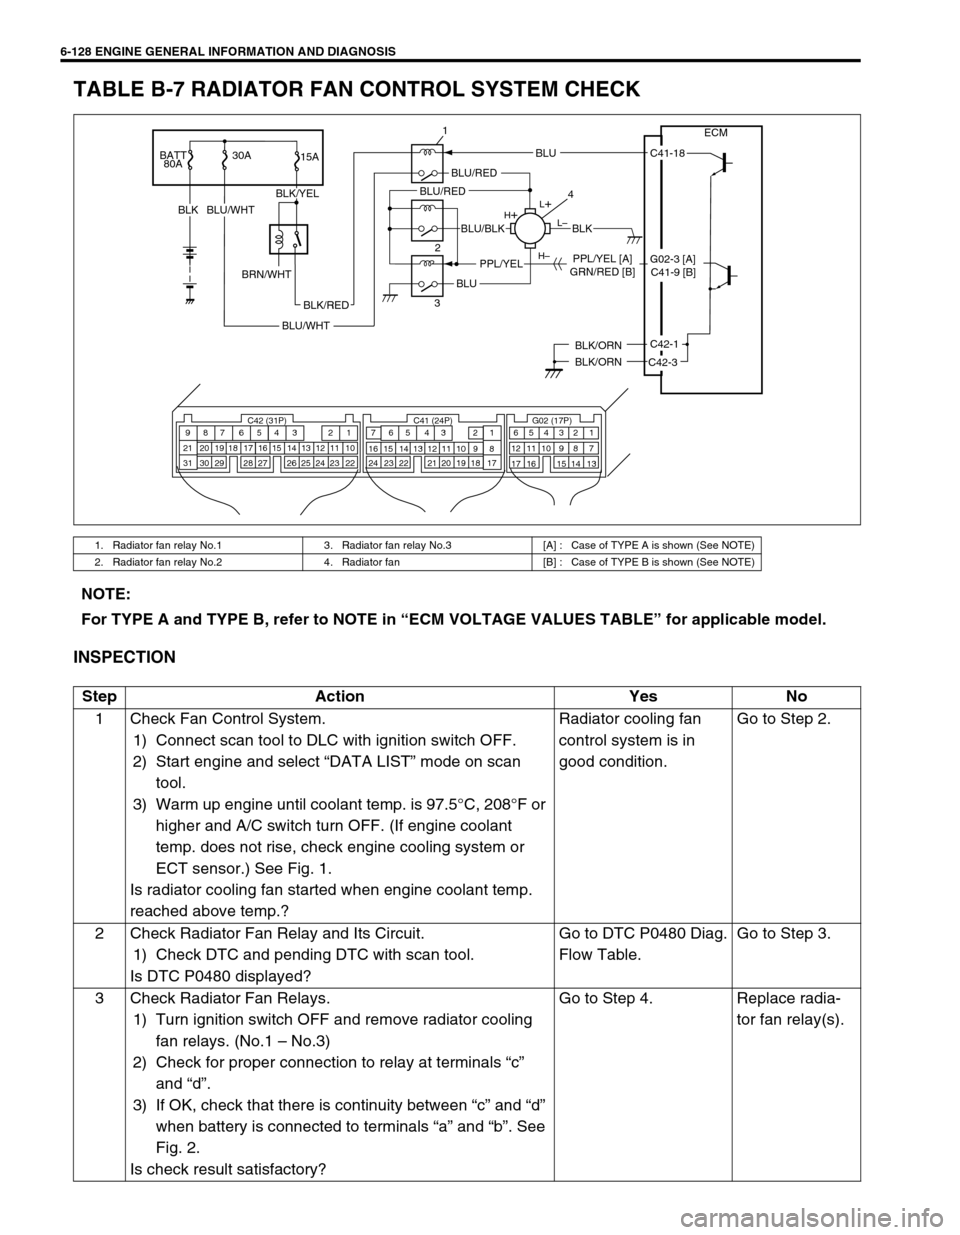 SUZUKI SWIFT 2000 1.G RG413 Service Owners Guide 6-128 ENGINE GENERAL INFORMATION AND DIAGNOSIS
TABLE B-7 RADIATOR FAN CONTROL SYSTEM CHECK
INSPECTION
1. Radiator fan relay No.1 3. Radiator fan relay No.3 [A] : Case of TYPE A is shown (See NOTE)
2. 